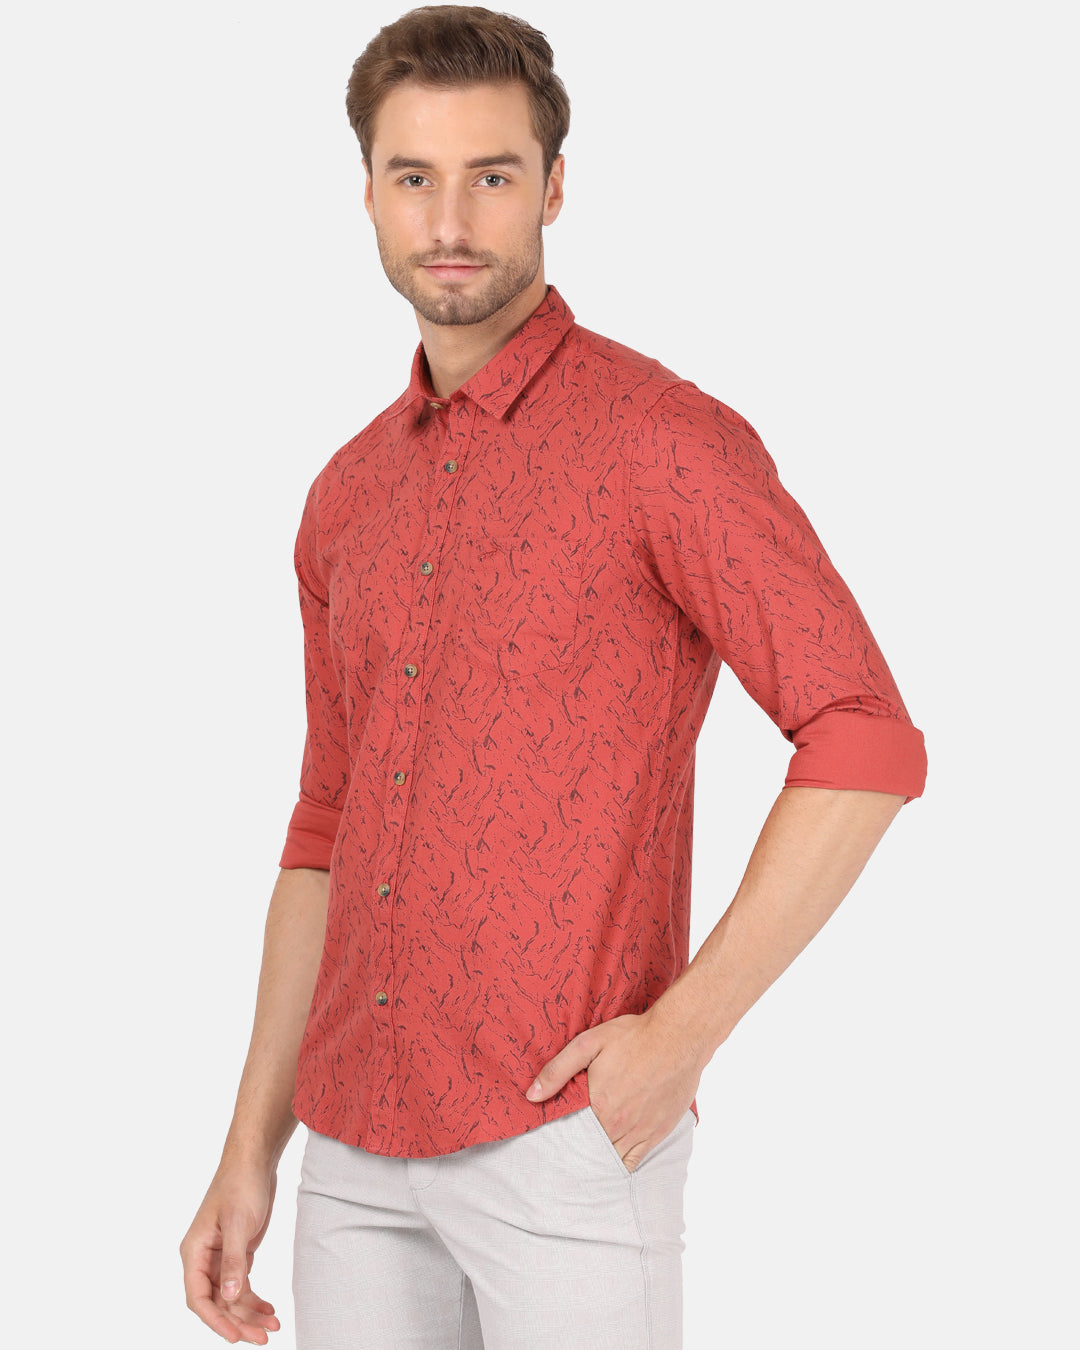 Crocodile Men's Casual Full Sleeve Slim Fit Printed Red with Collar Shirt